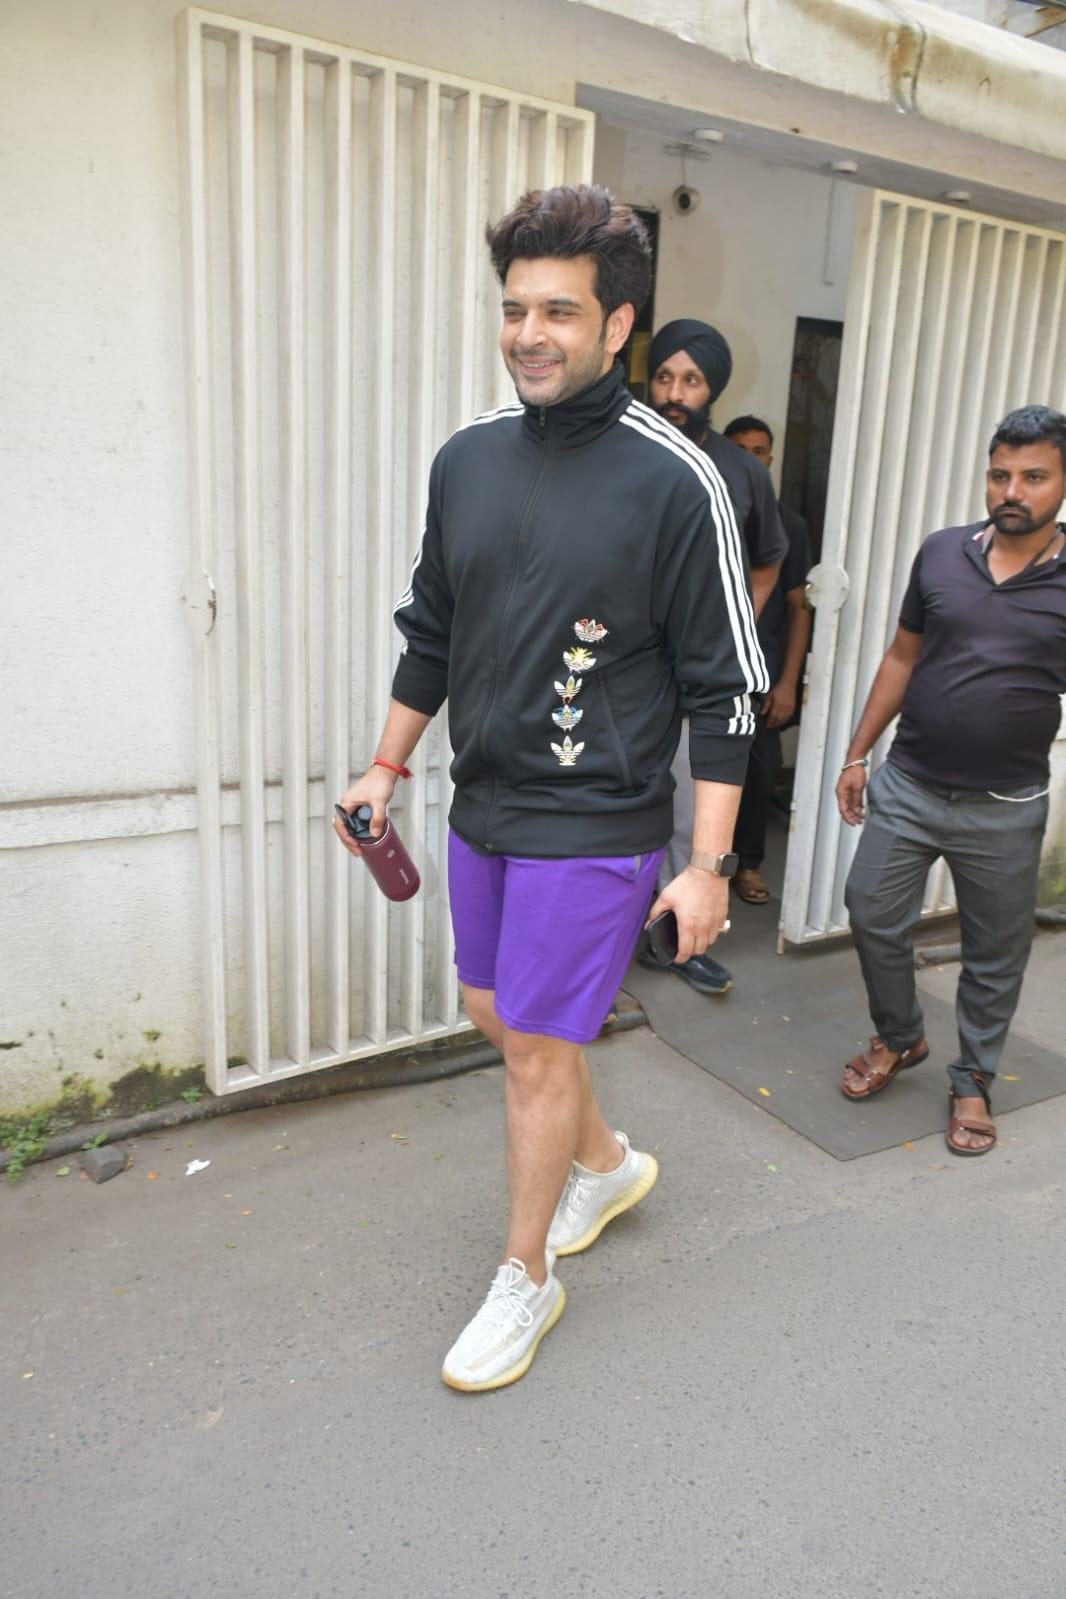 Karan Kundrra was spotted at his gym today